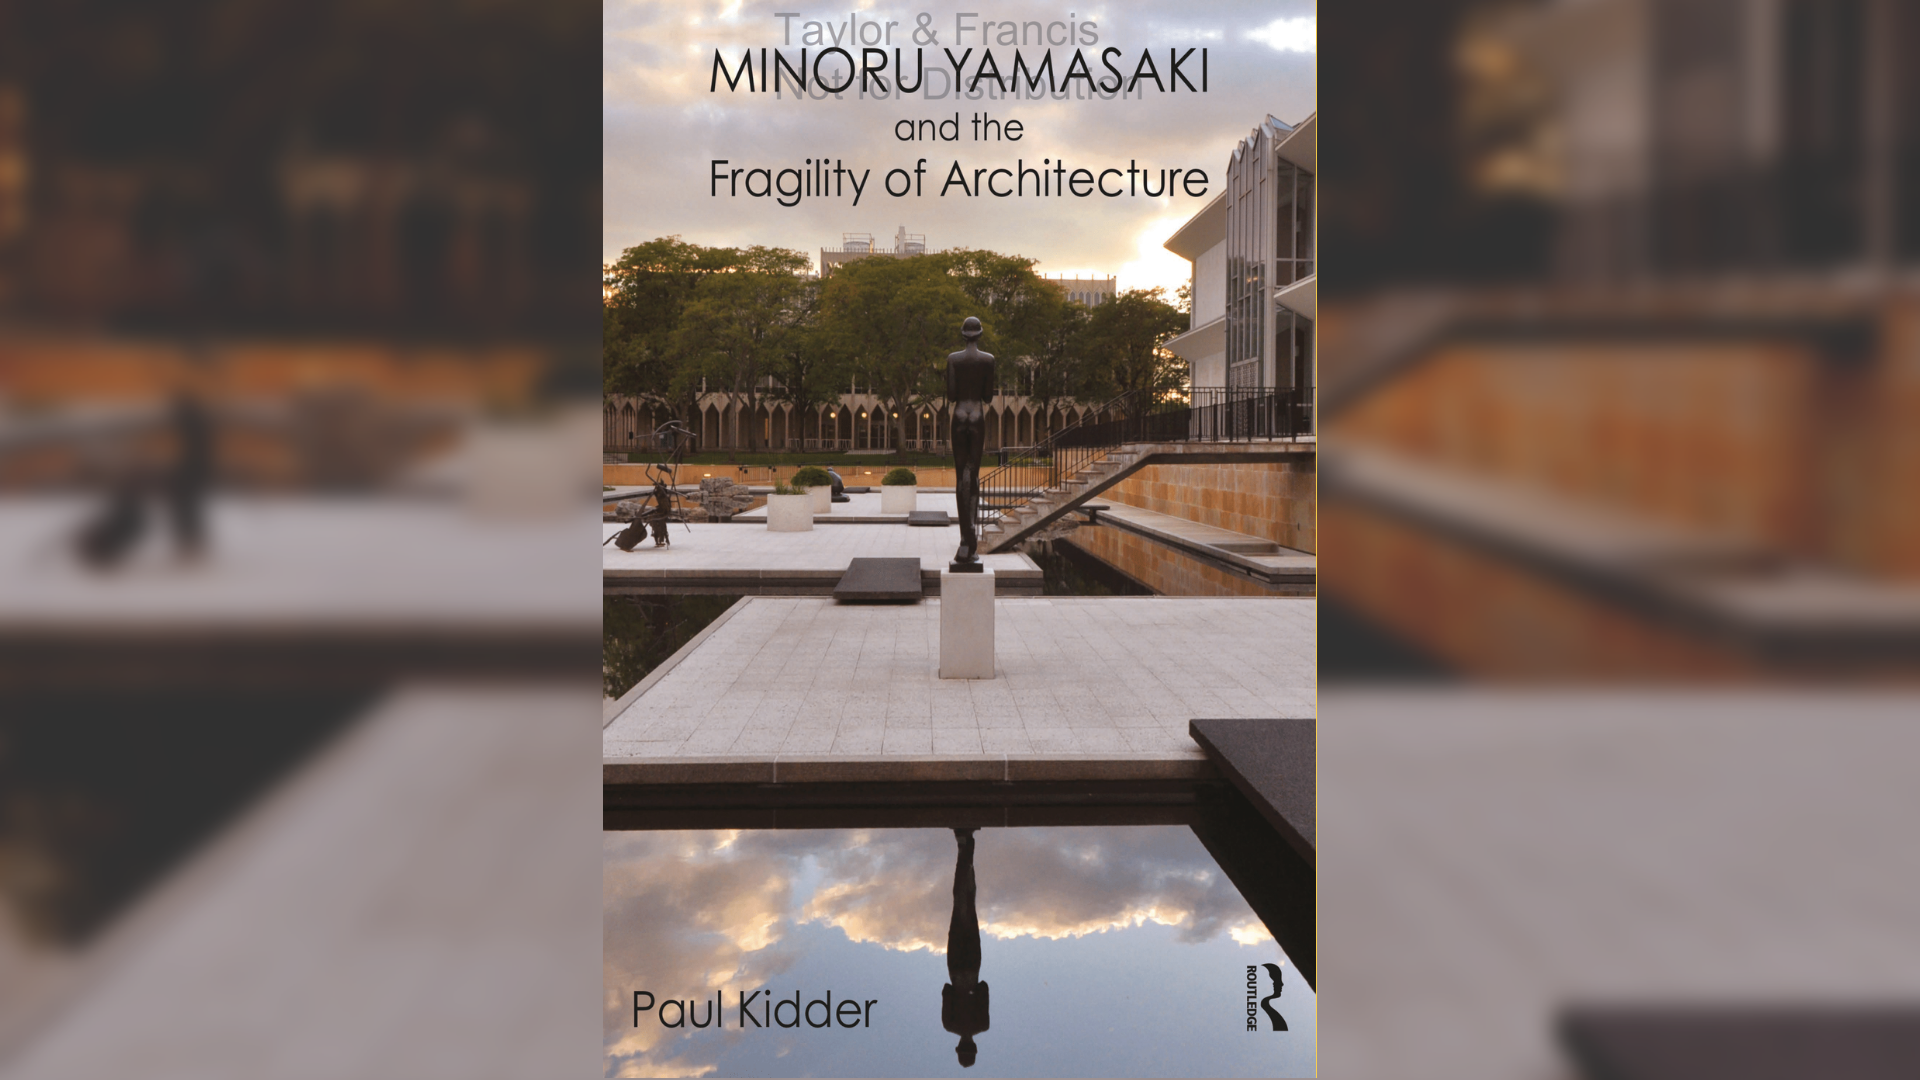 “Minoru Yamasaki and the Fragility of Architecture” is a new book that studies Minoru Yamasaki's historic influence on American architecture. #newdaynw